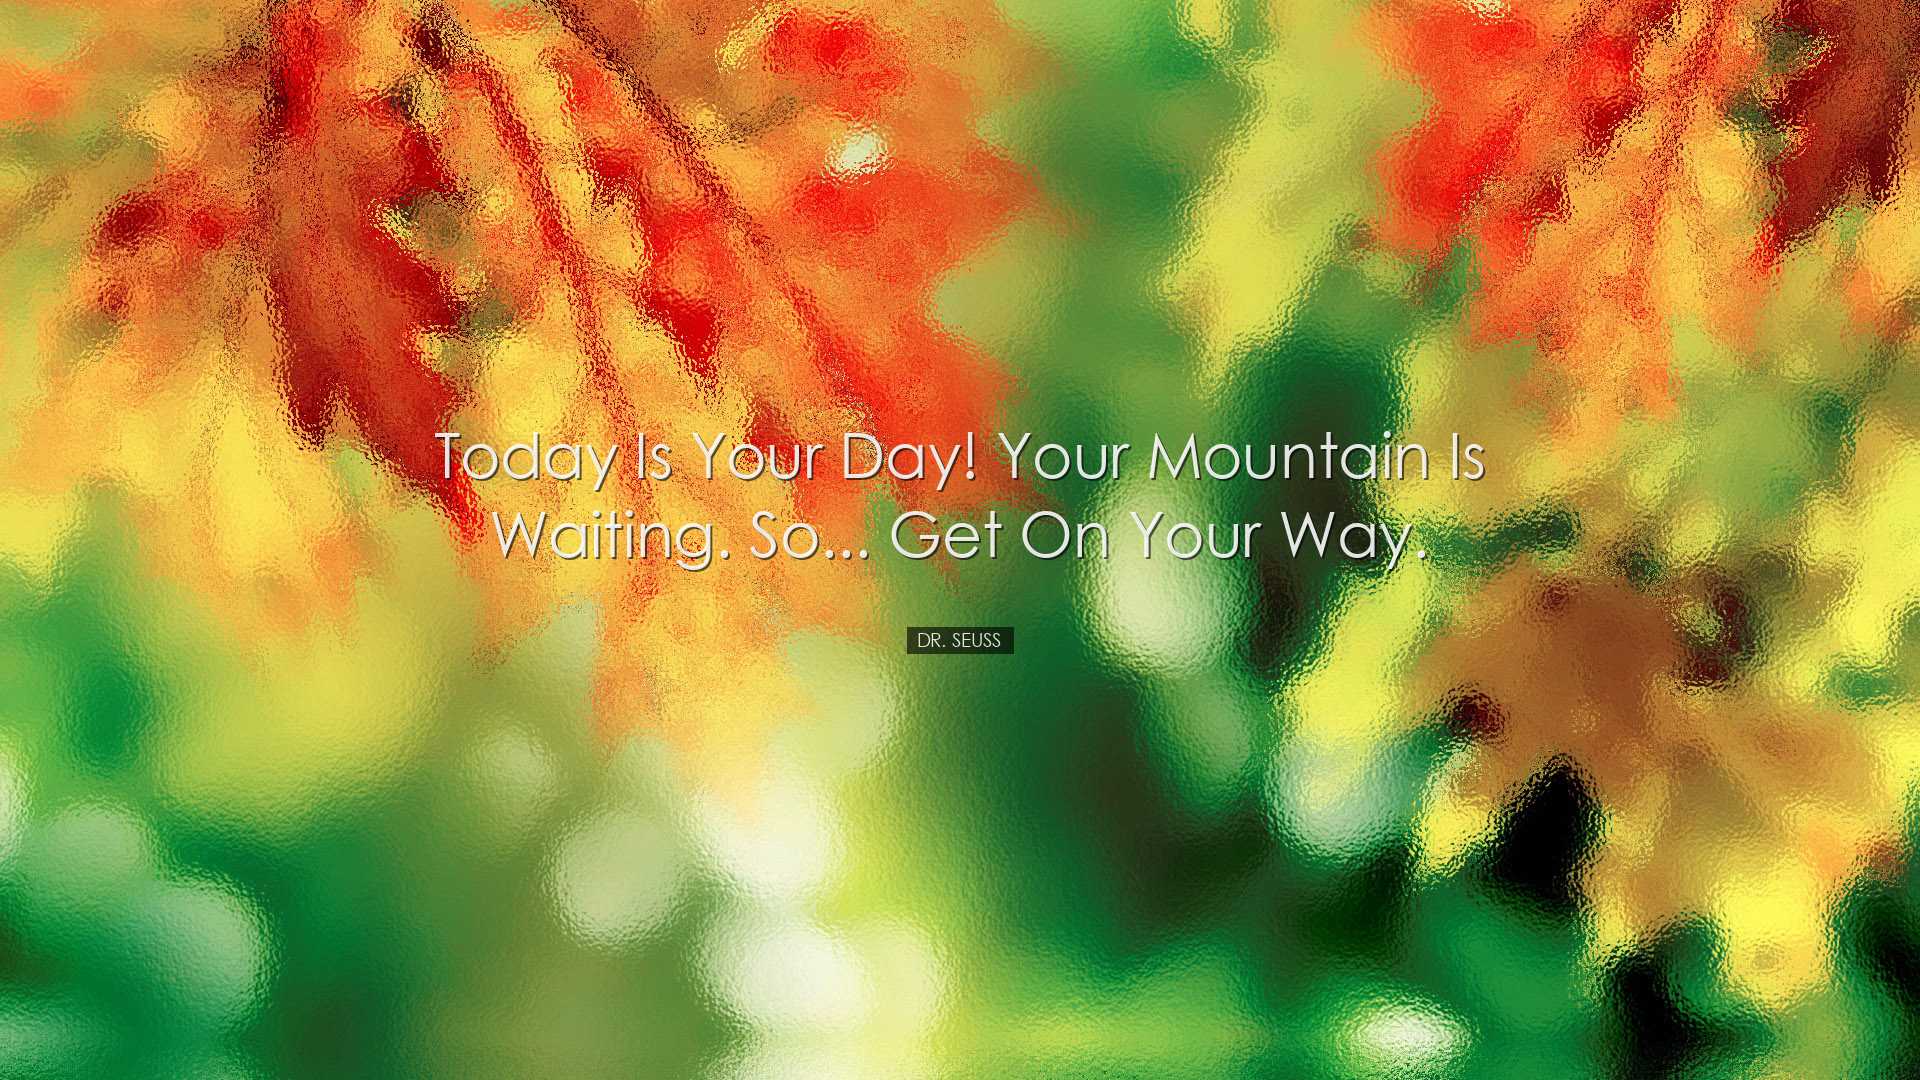 Today is your day! Your mountain is waiting. So... get on your way